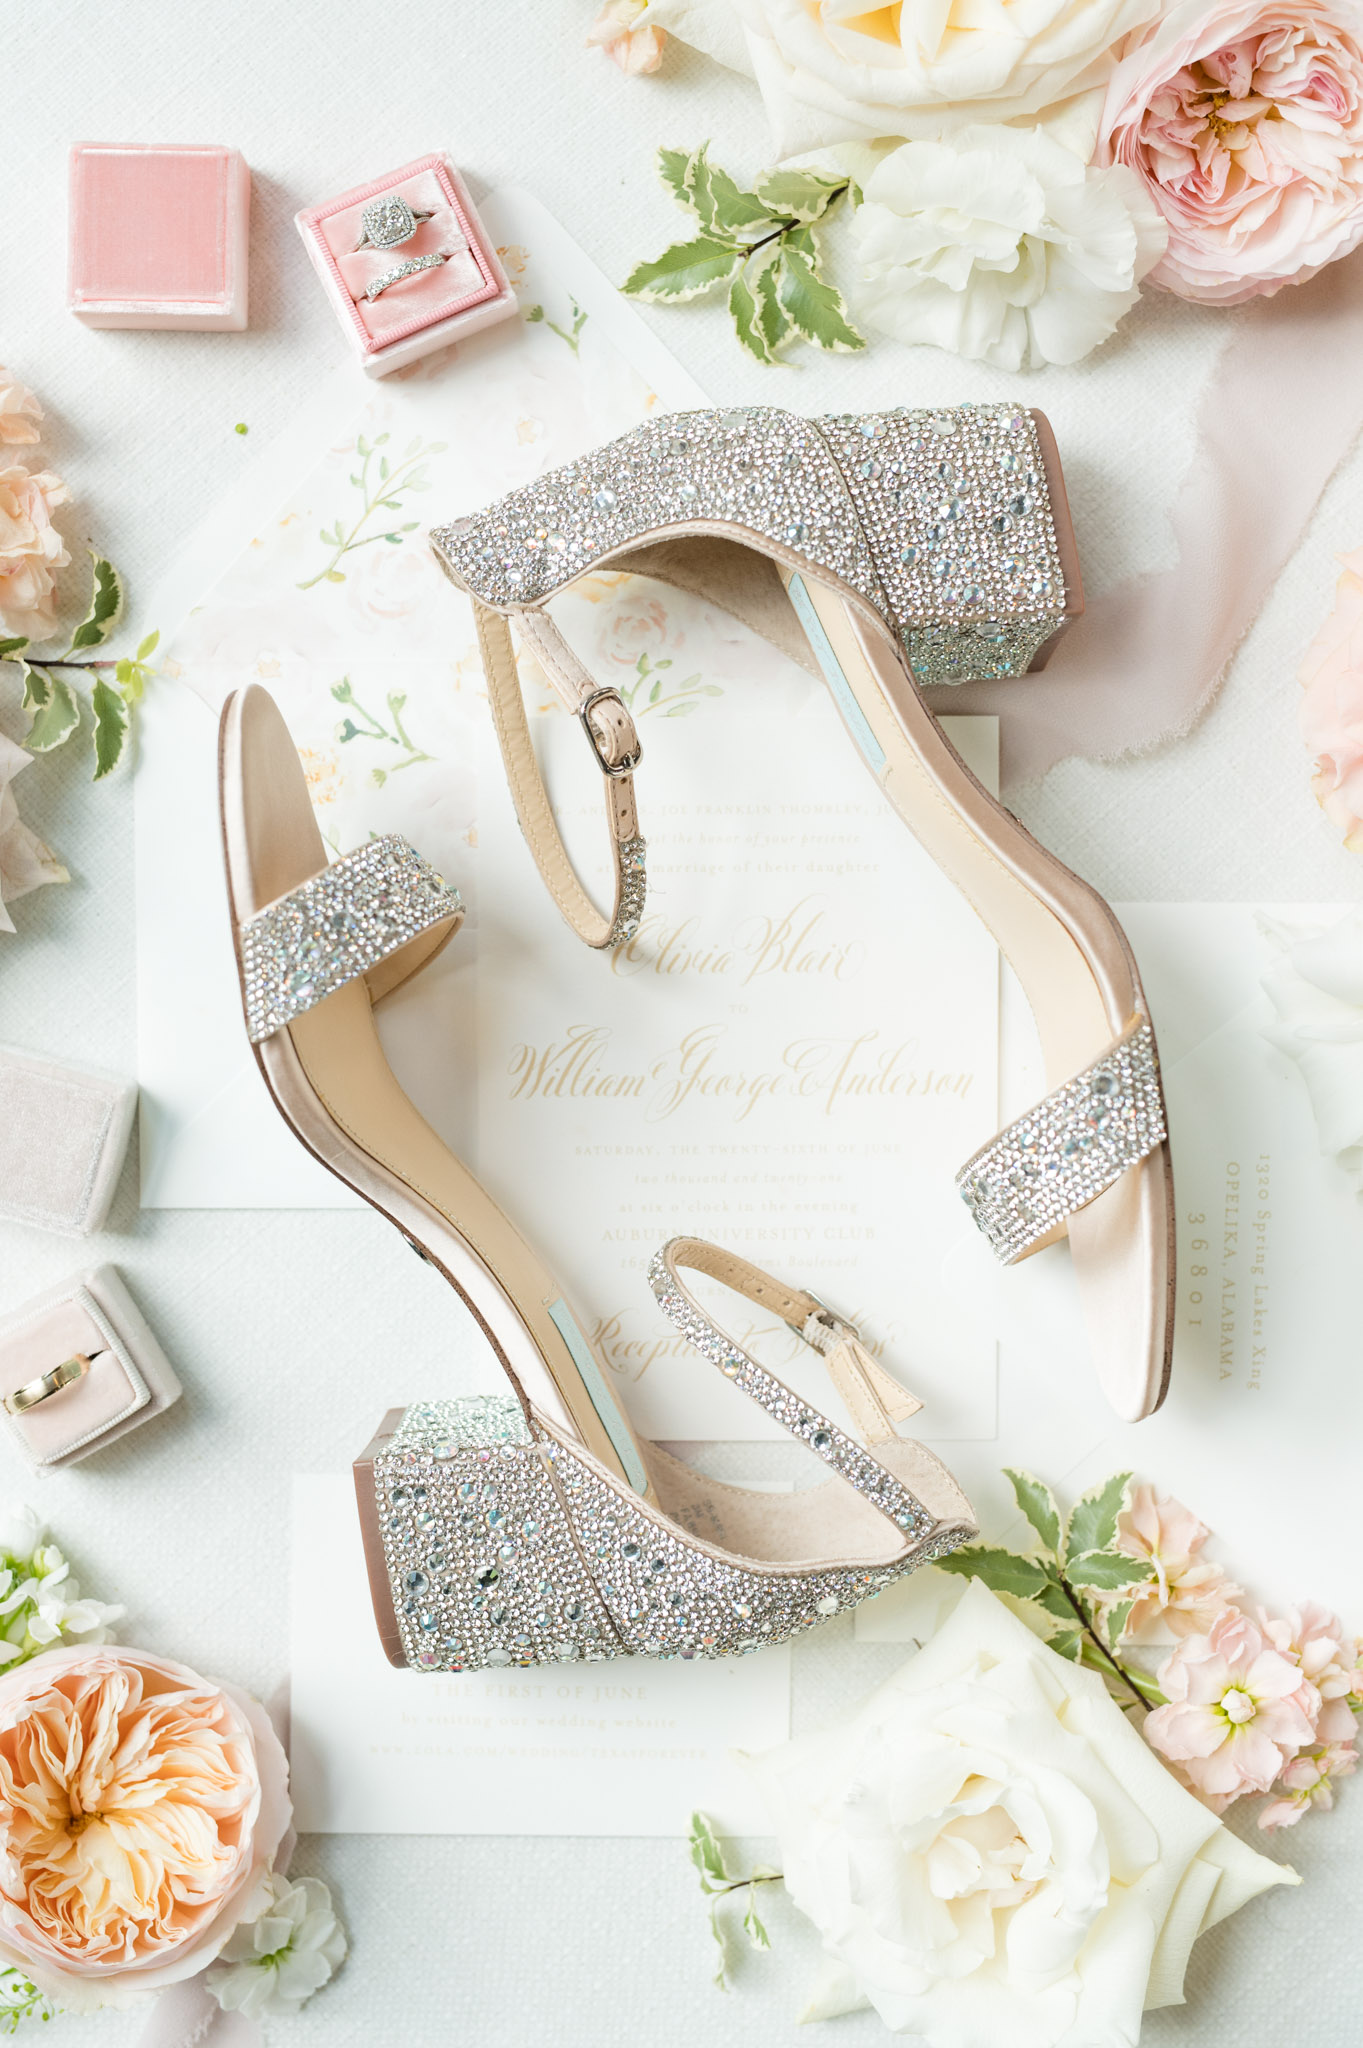 Bridal shoes sit with flowers and details.